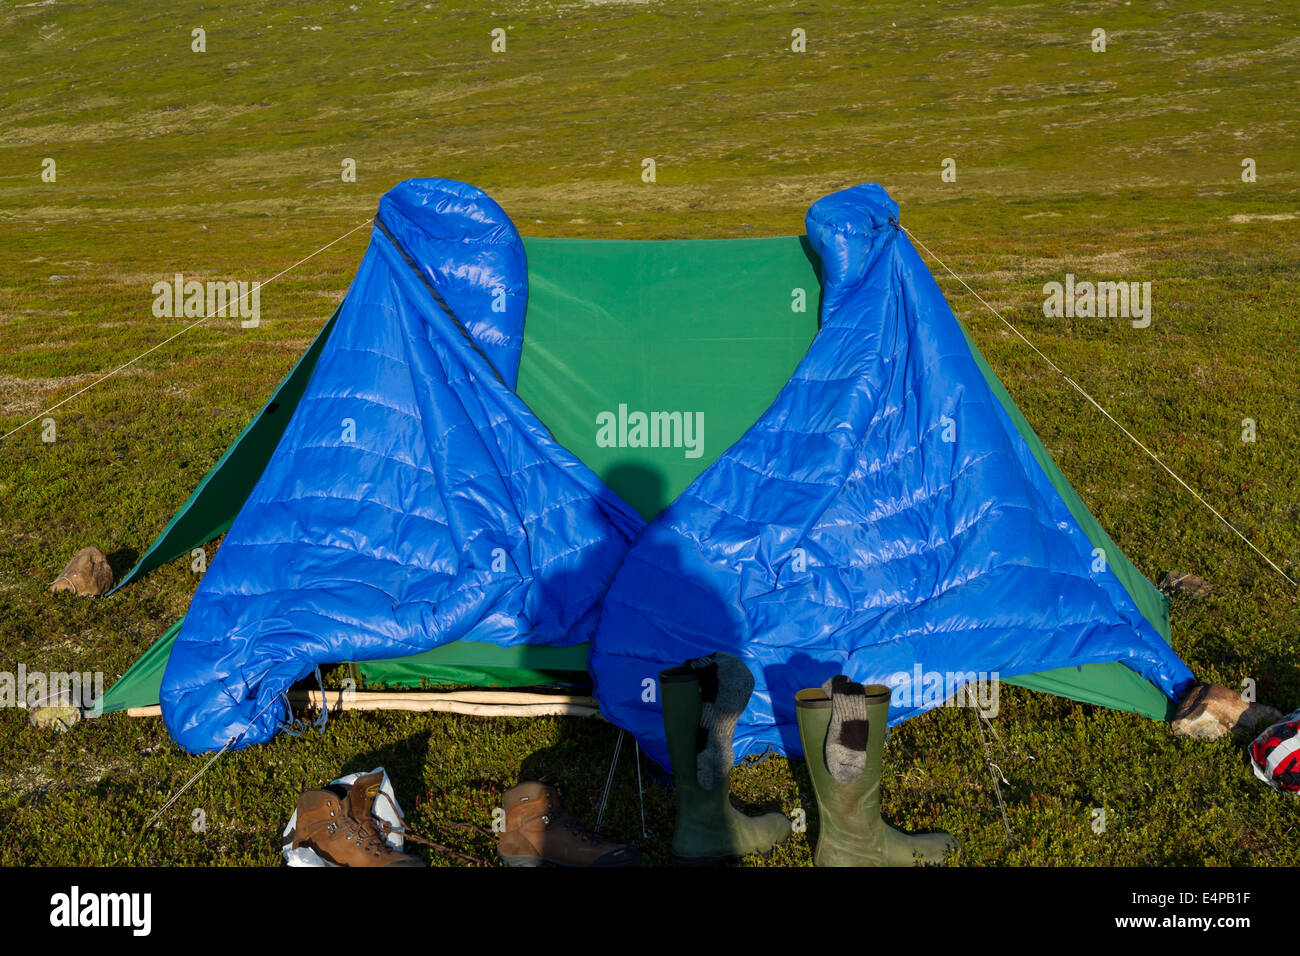 Shadow from a trekker on his tent with two sleeping bags hanging up to dry in the morning sun Stock Photo